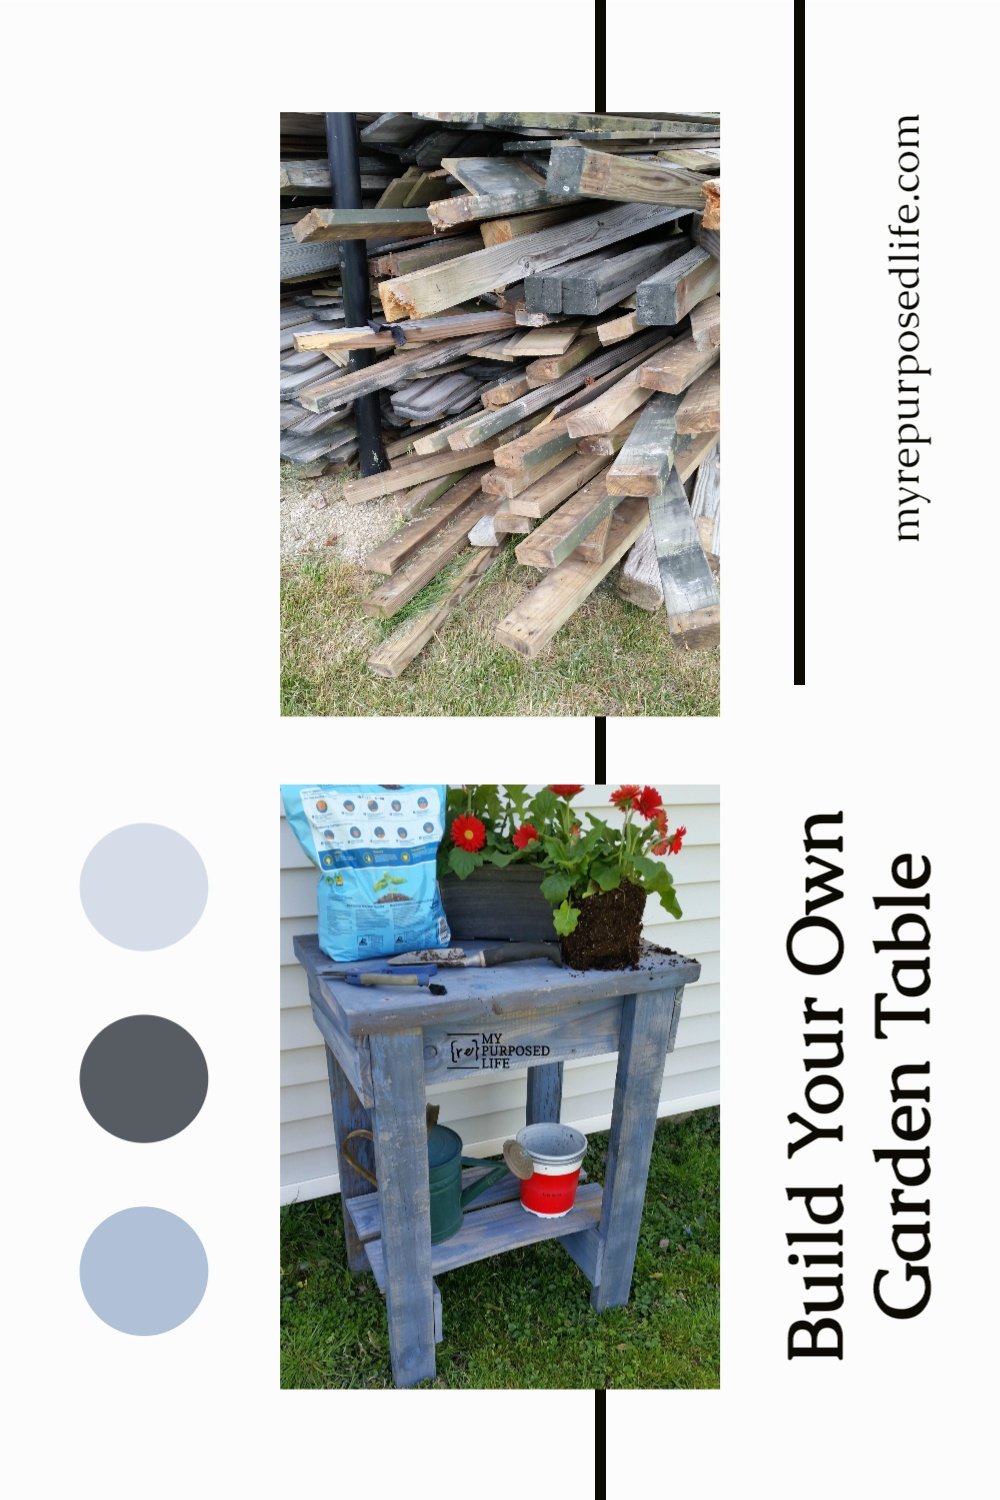 How to make a rustic garden table perfect for potting, entertaining and more. Step by step tutorial using reclaimed fence boards. Weekend project for you to make. Check it out! #MyRepurposedLife #upcycled #reclaimed #lumber #garden #pottingshed via @repurposedlife